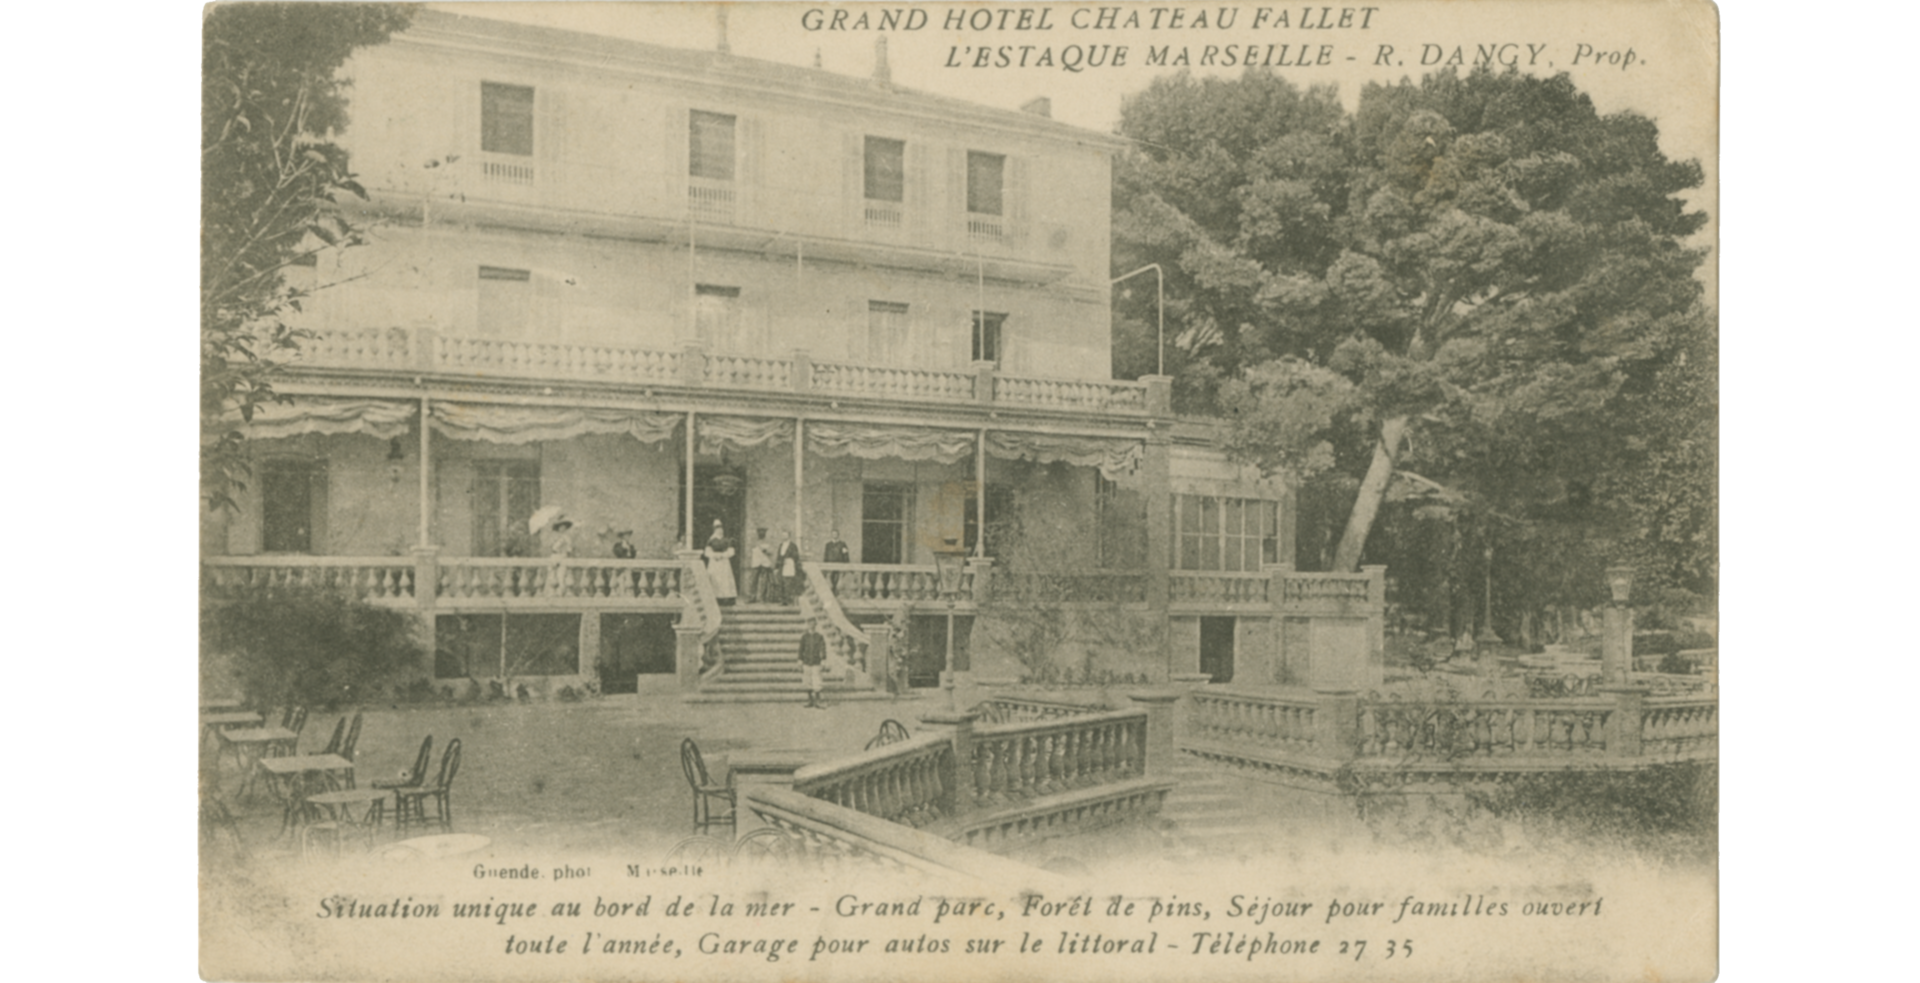 Photographed black and white postcard of Grand Hôtel Château Fallet overlooking the hotel and a park